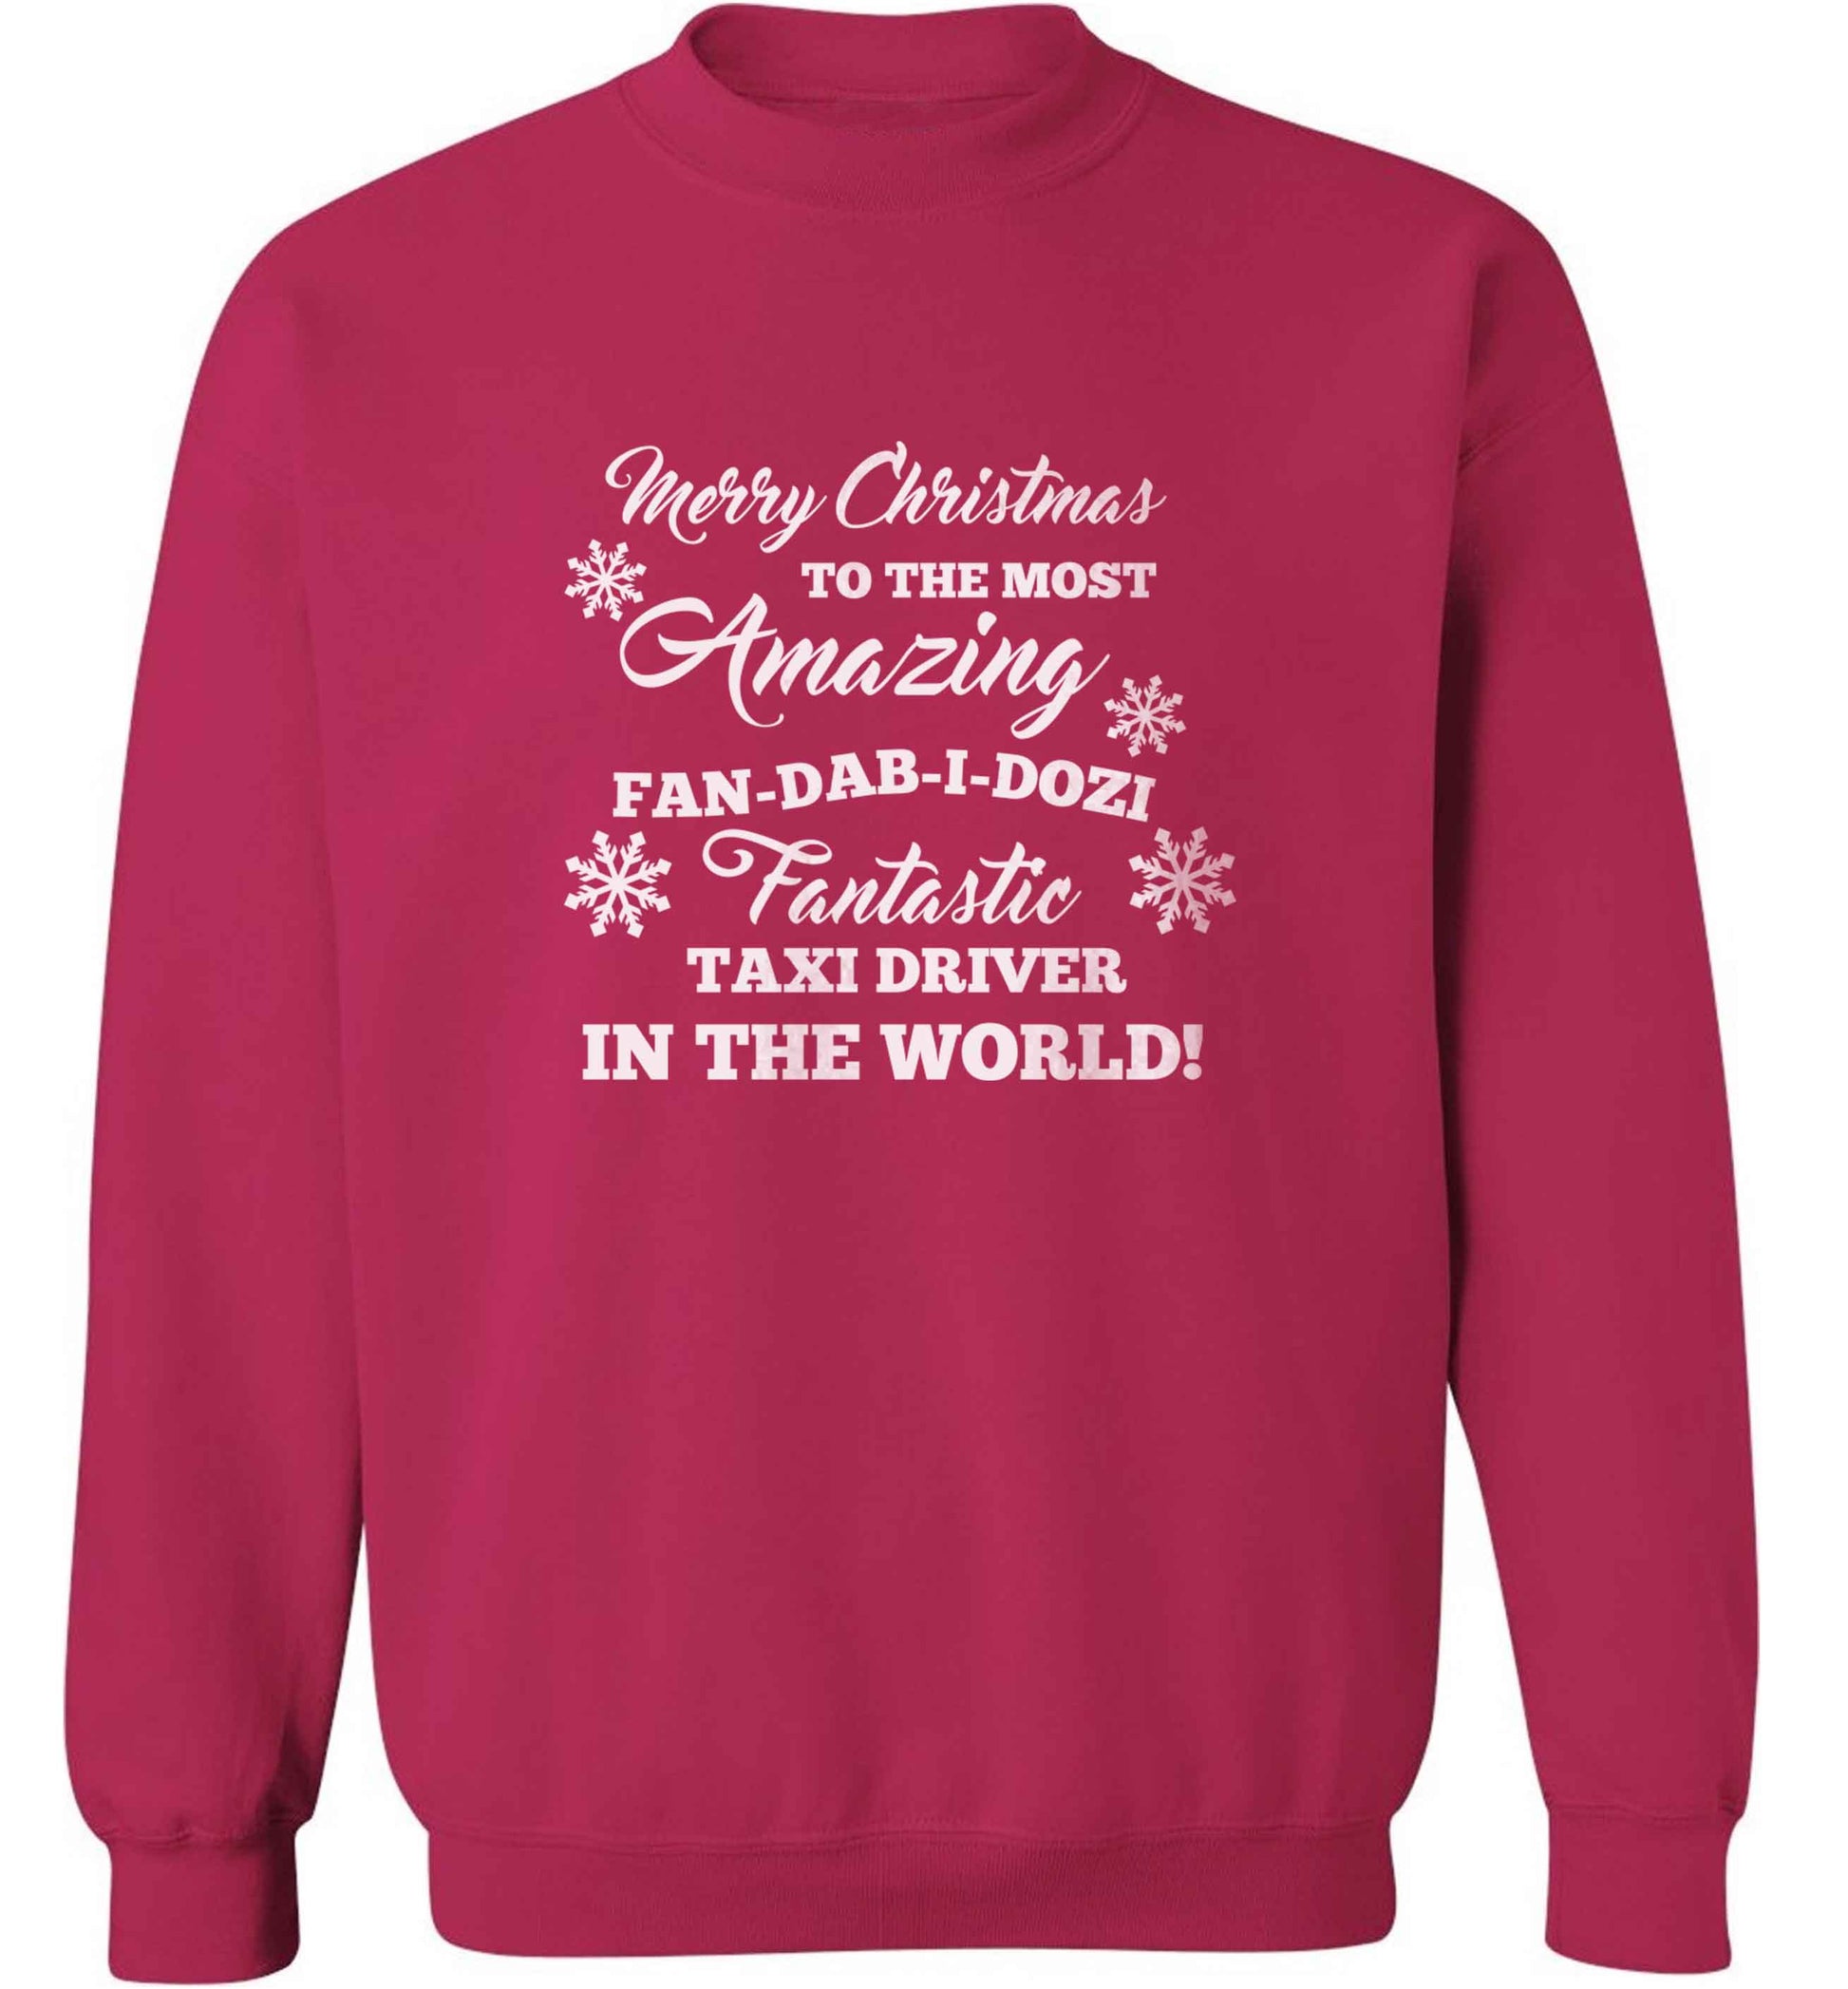 Merry Christmas to the most amazing taxi driver in the world! adult's unisex pink sweater 2XL